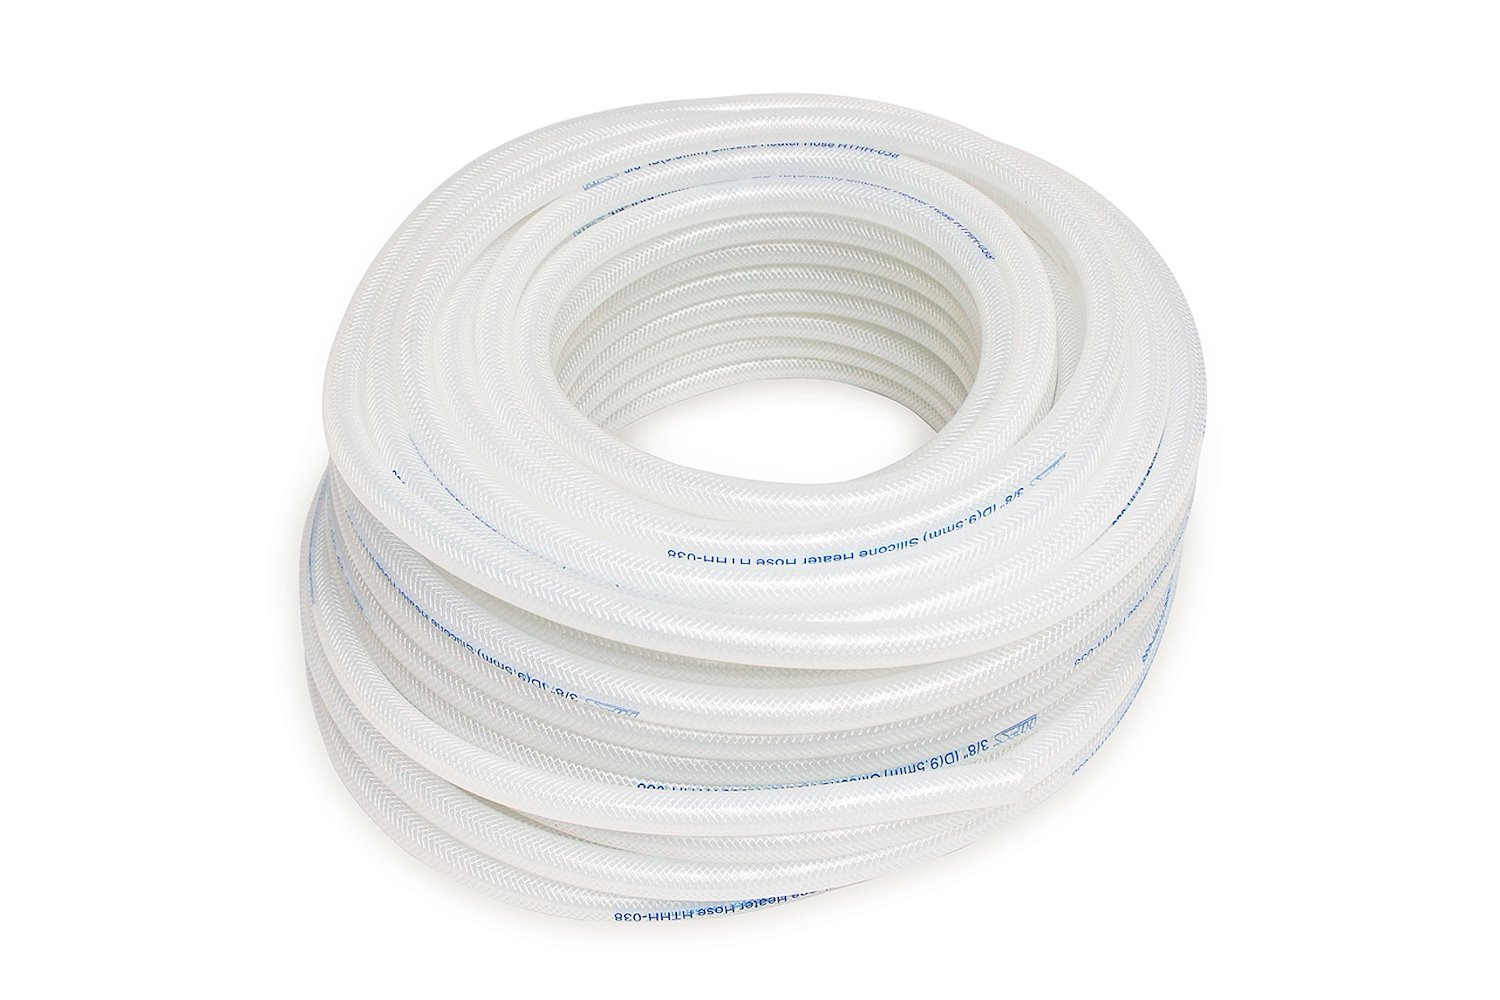 HTHH-013-CLEARx250 Silicone Heater Hose Tubing, High-Temp Reinforced, 1/8 in. ID, 250 ft. Roll, Clear